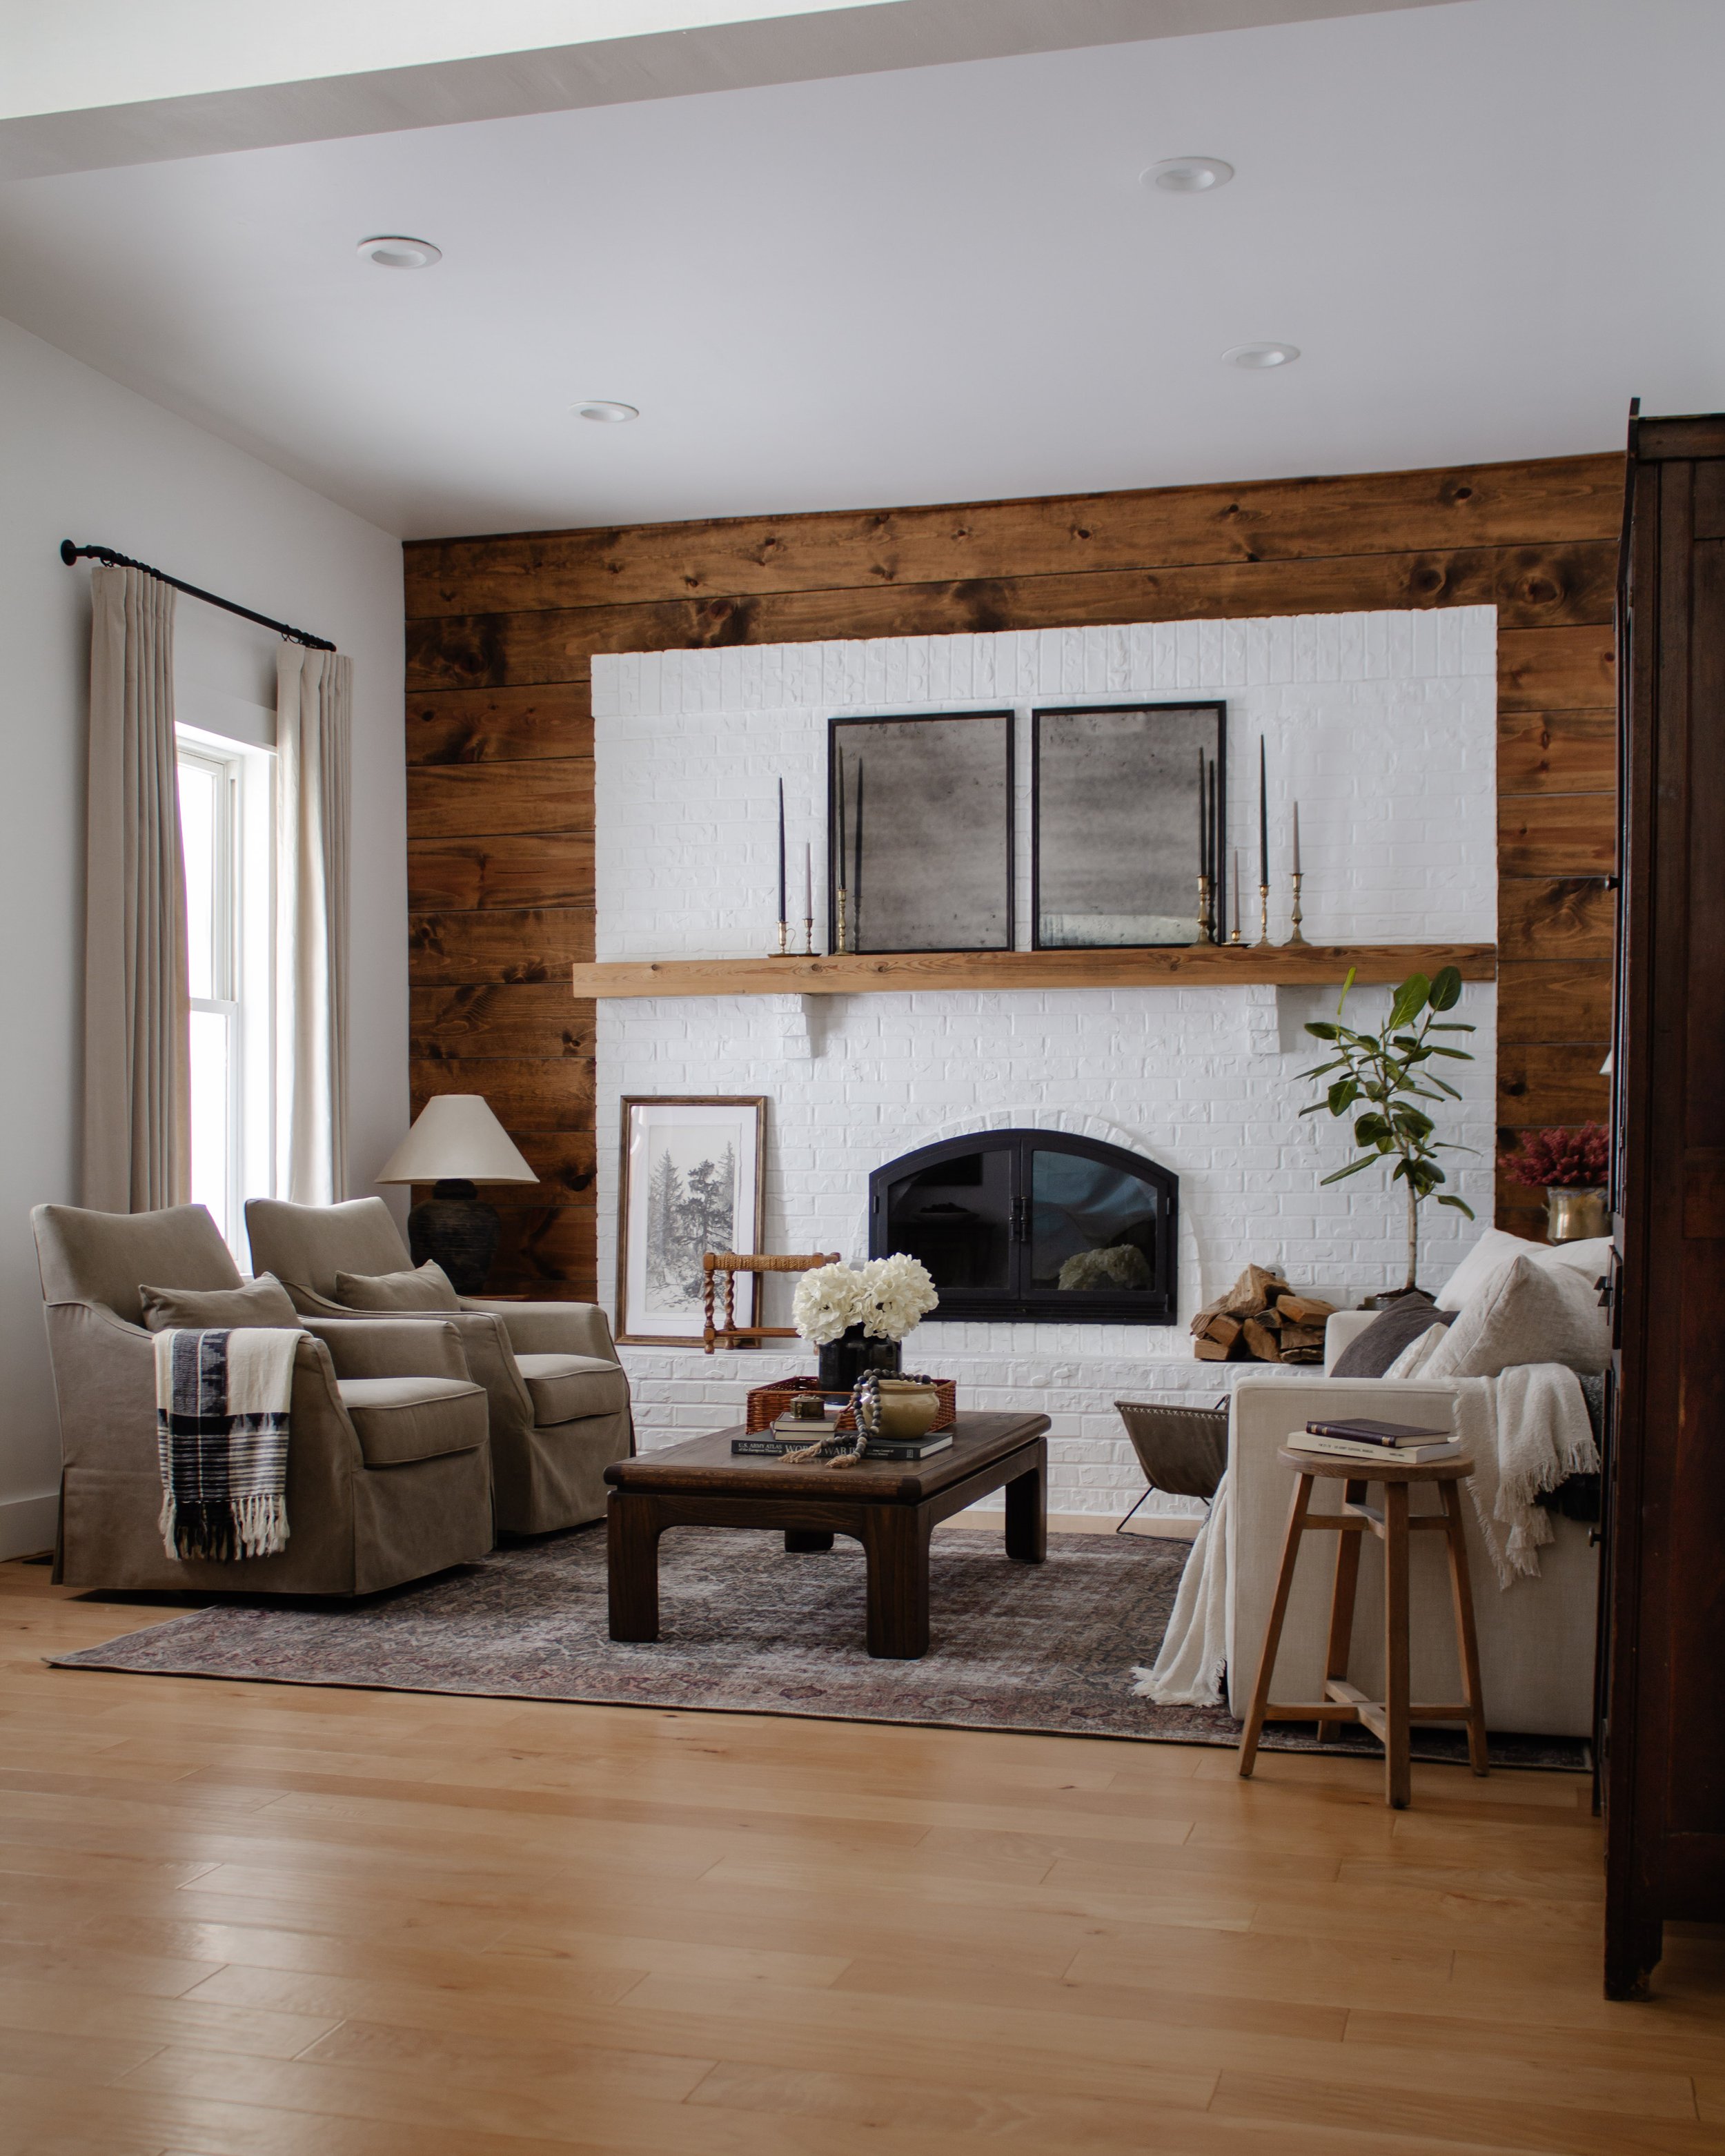 Living Room Refresh Reveal - Nadine Stay | How we gave our living room a cabin inspired makeover. Elevated California Casual cabin living room design. Brick fireplace with a wood wall. Cozy living room decorating ideas. | Nadine Stay